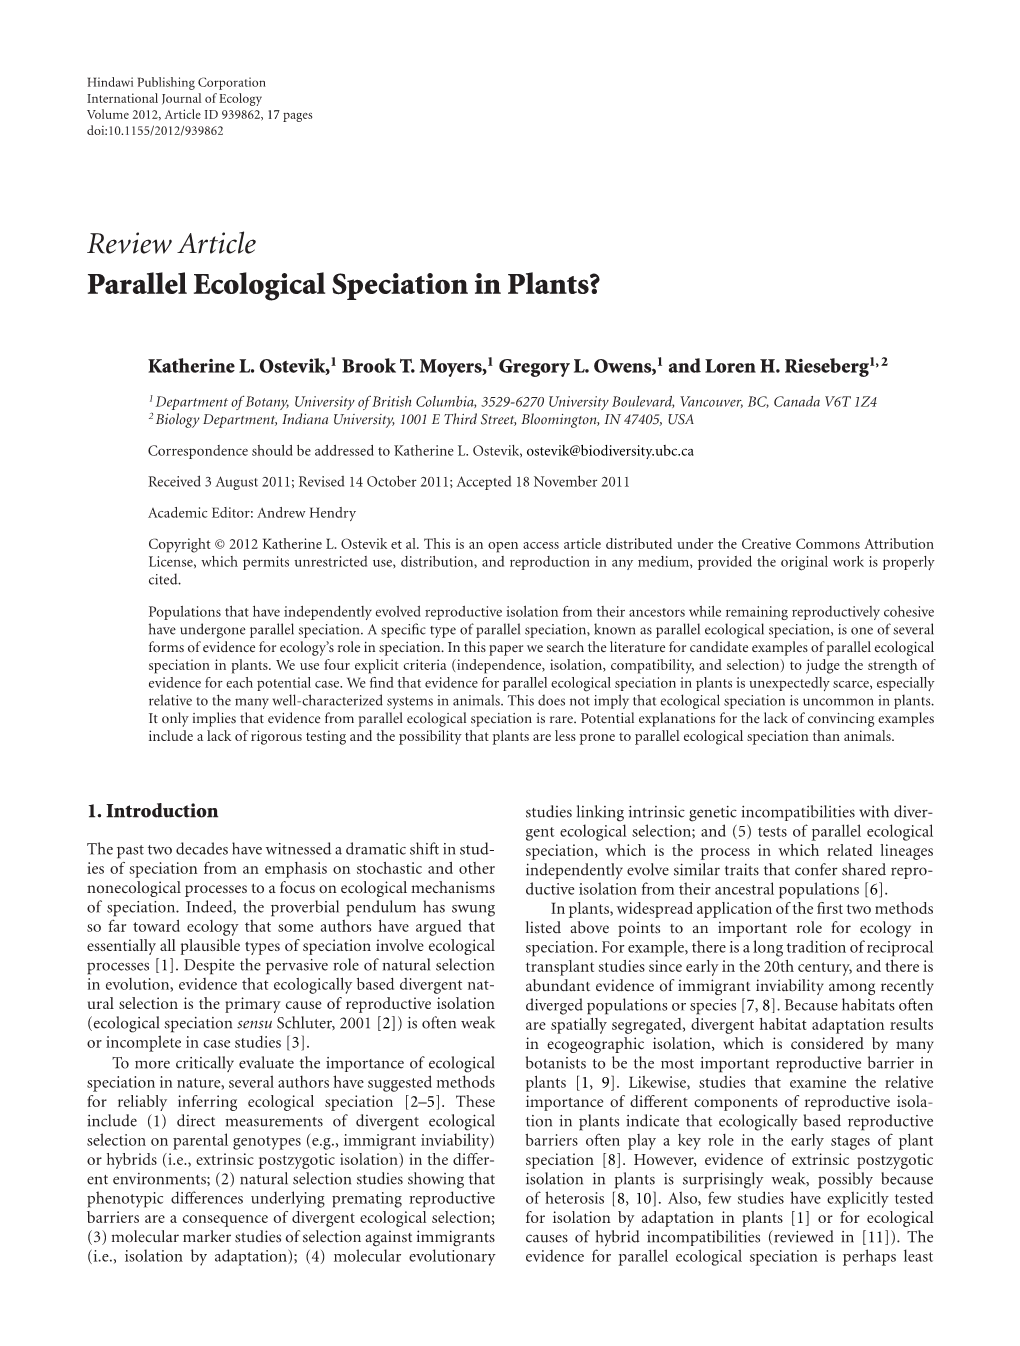 Review Article Parallel Ecological Speciation in Plants?